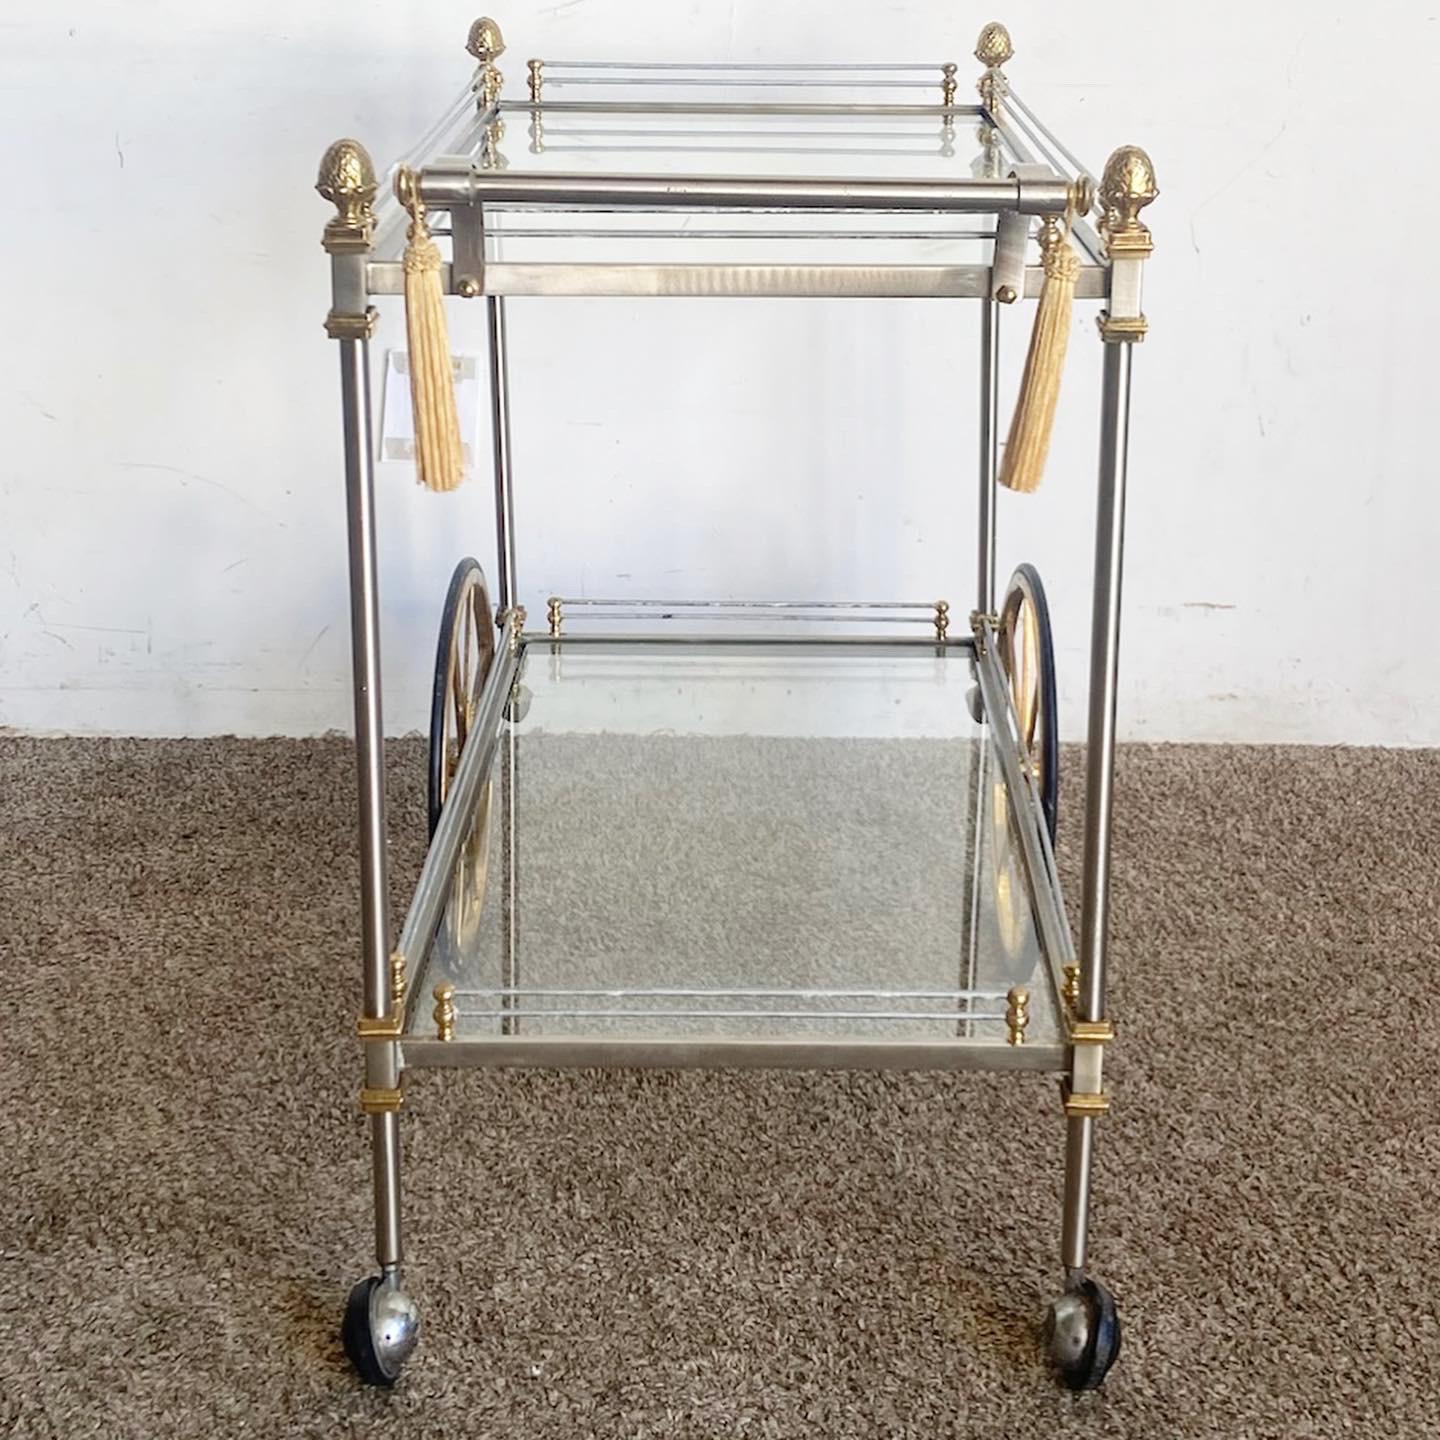 Experience the epitome of luxury with the Regency Metallic Two-Tier Bar Cart. Adorned in gold and silver finishes, its opulent frame is complemented by clear glass shelves, blending classic Regency charm with modern sophistication. Beyond its